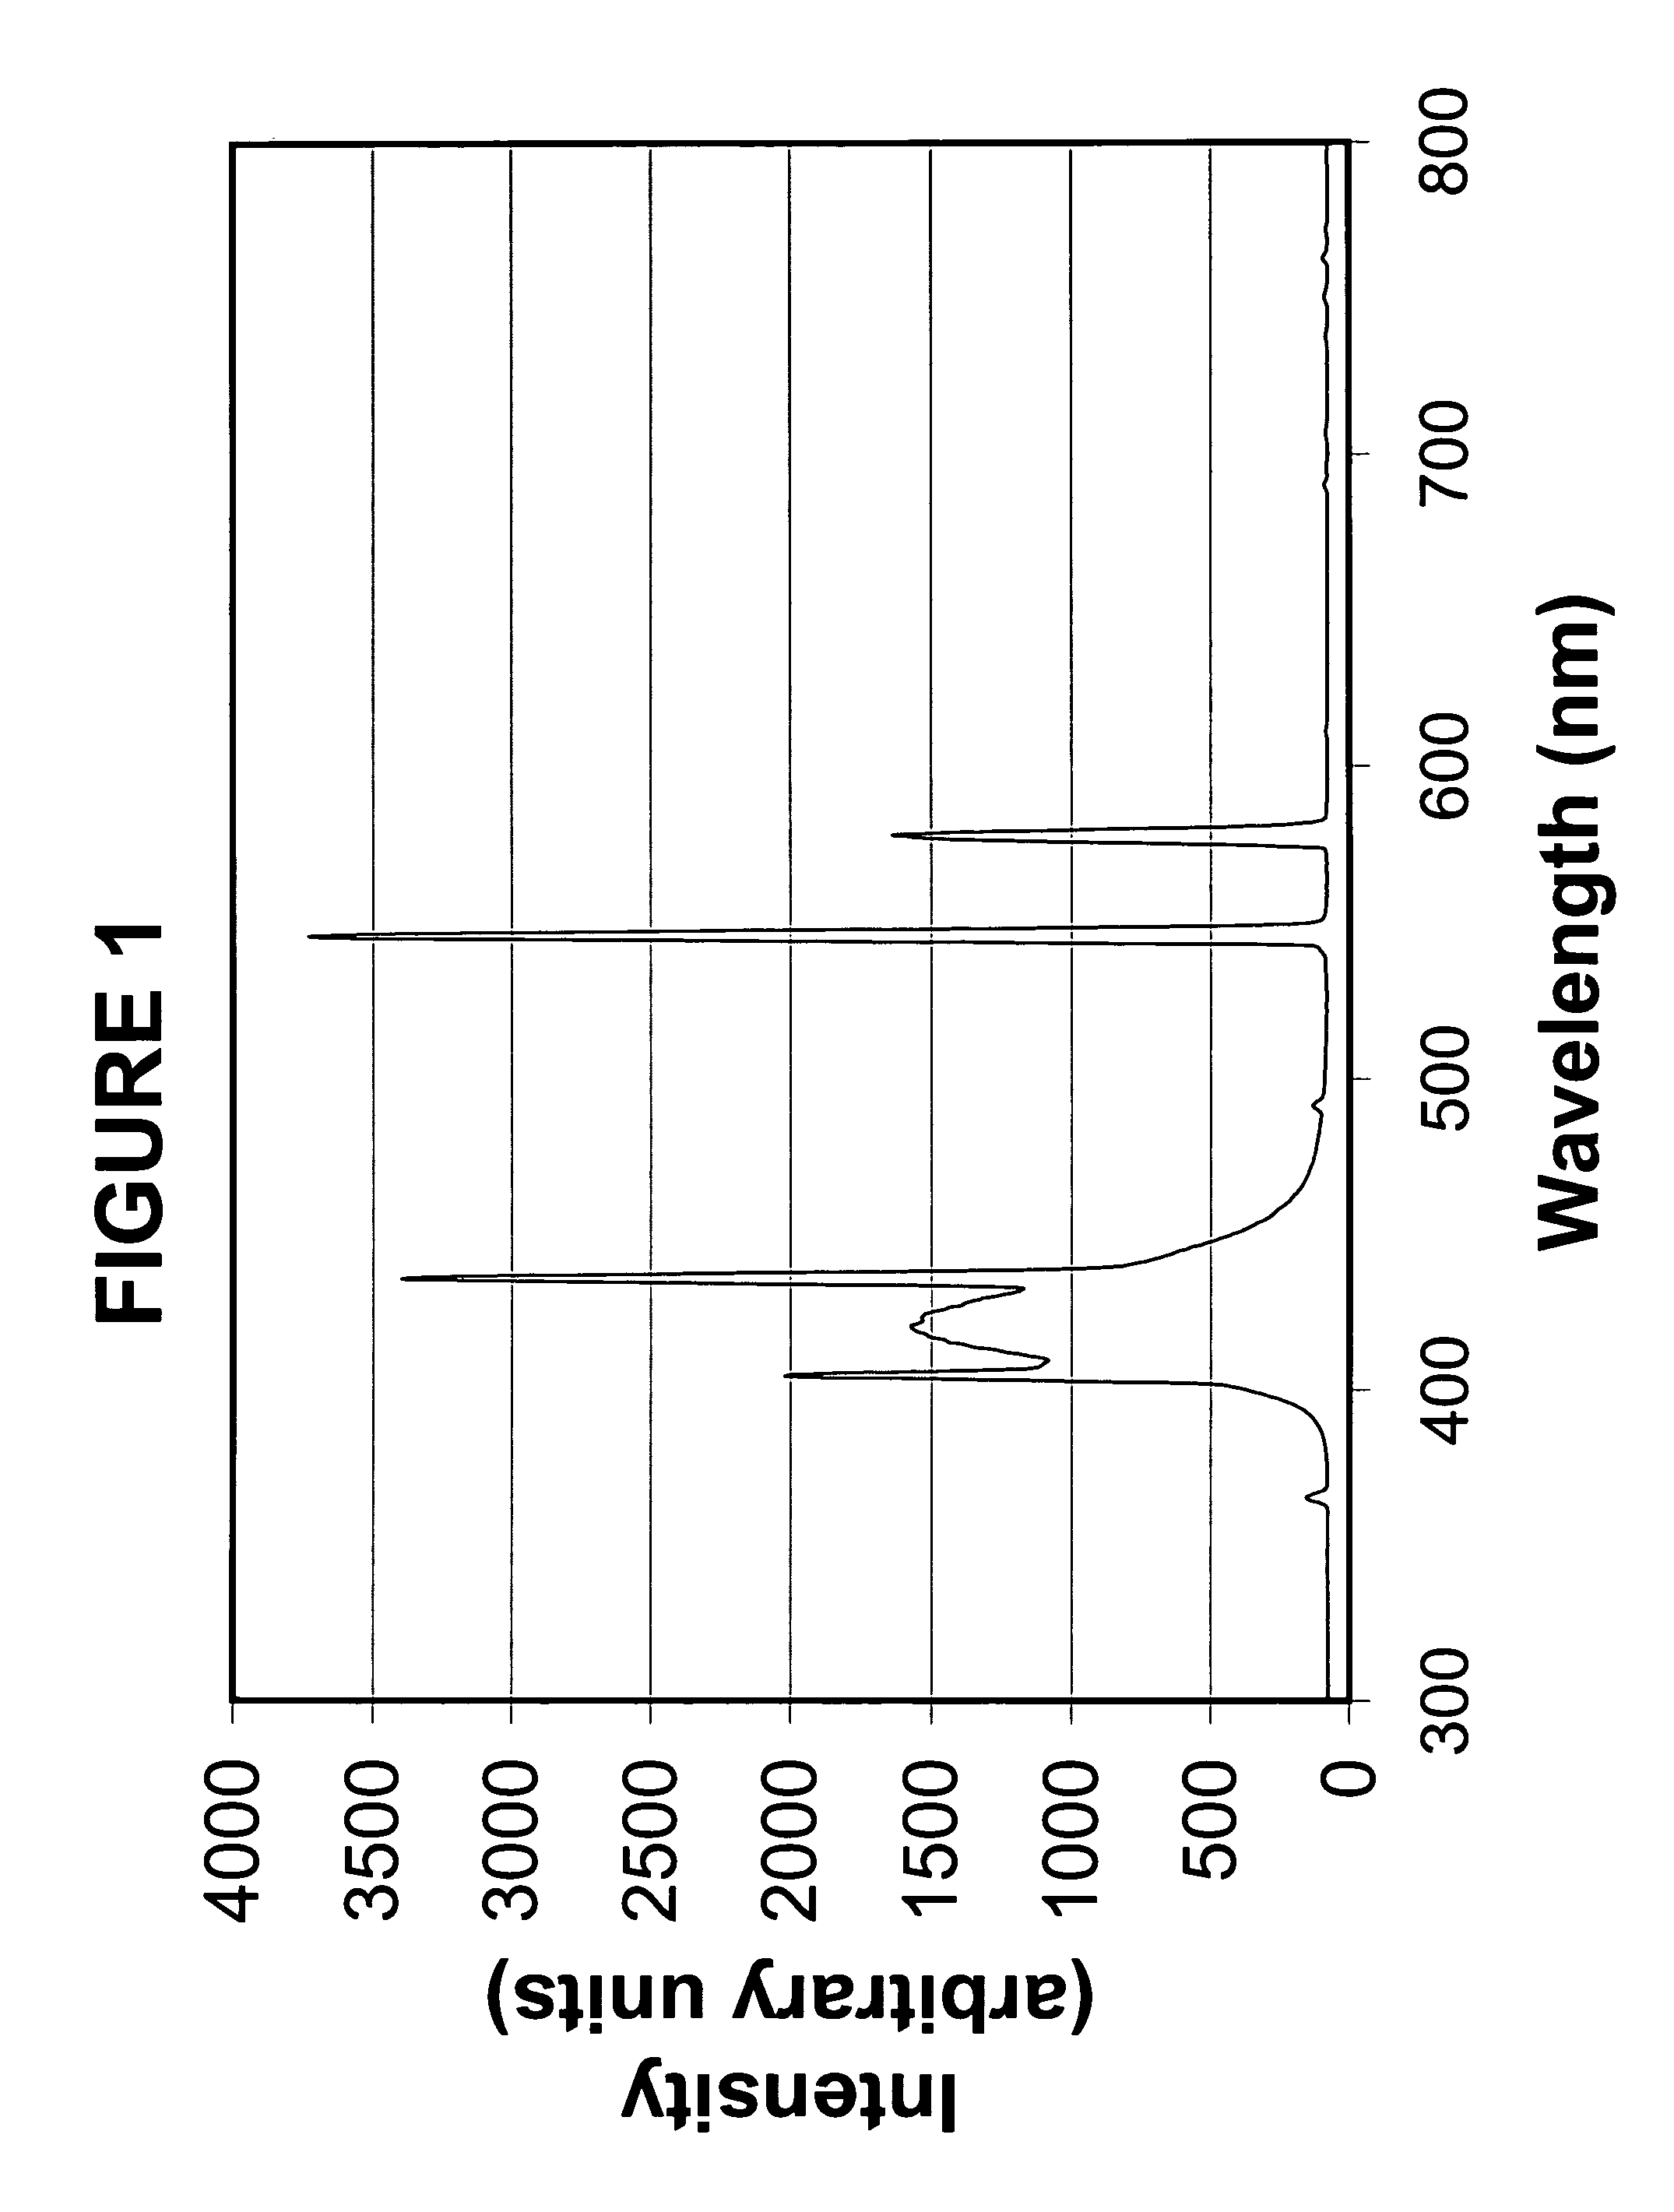 Photochromic blue light filtering materials and ophthalmic devices